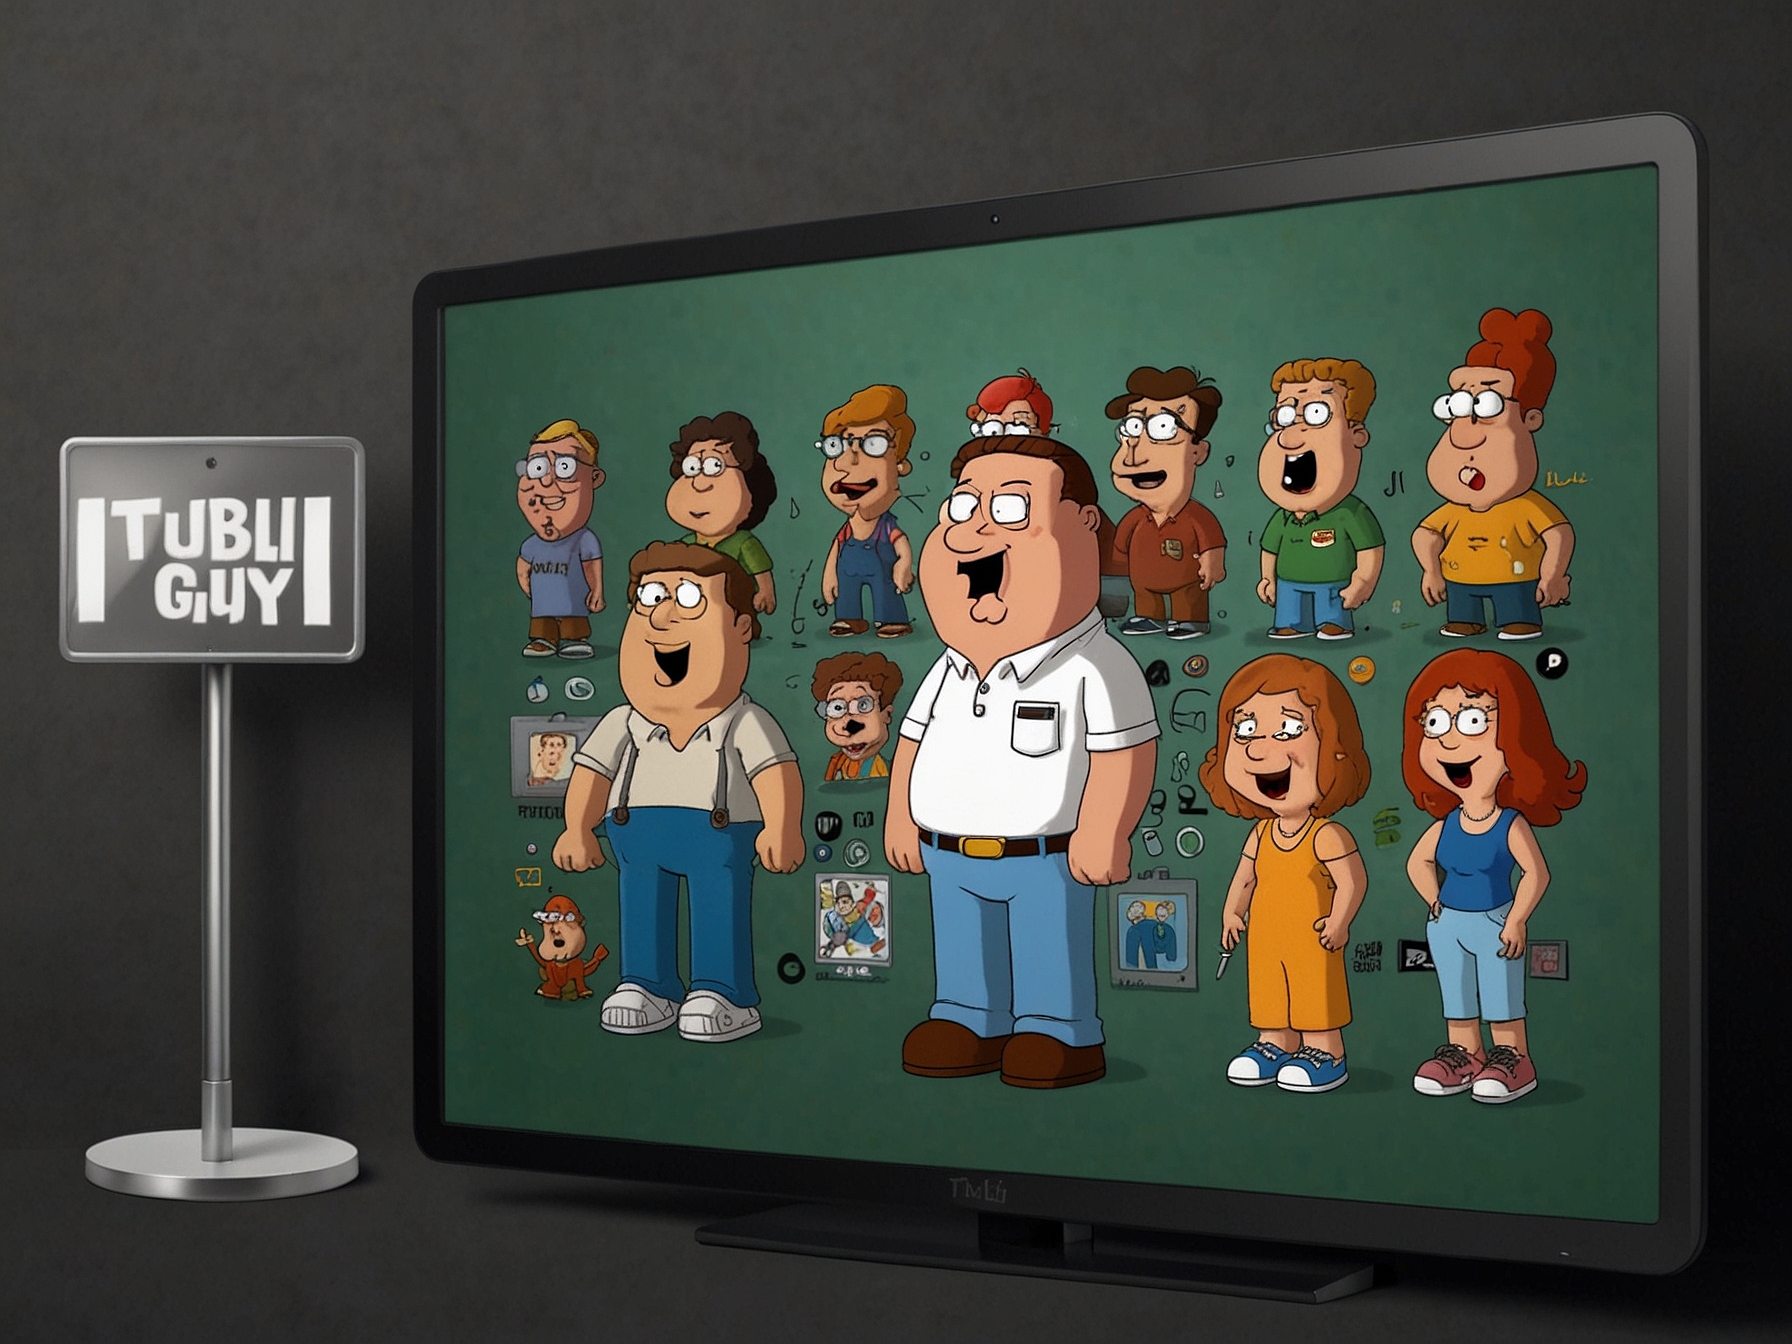 An image showcasing logos of platforms like Hulu and Tubi on a screen, indicating accessible services to stream Family Guy episodes for free.